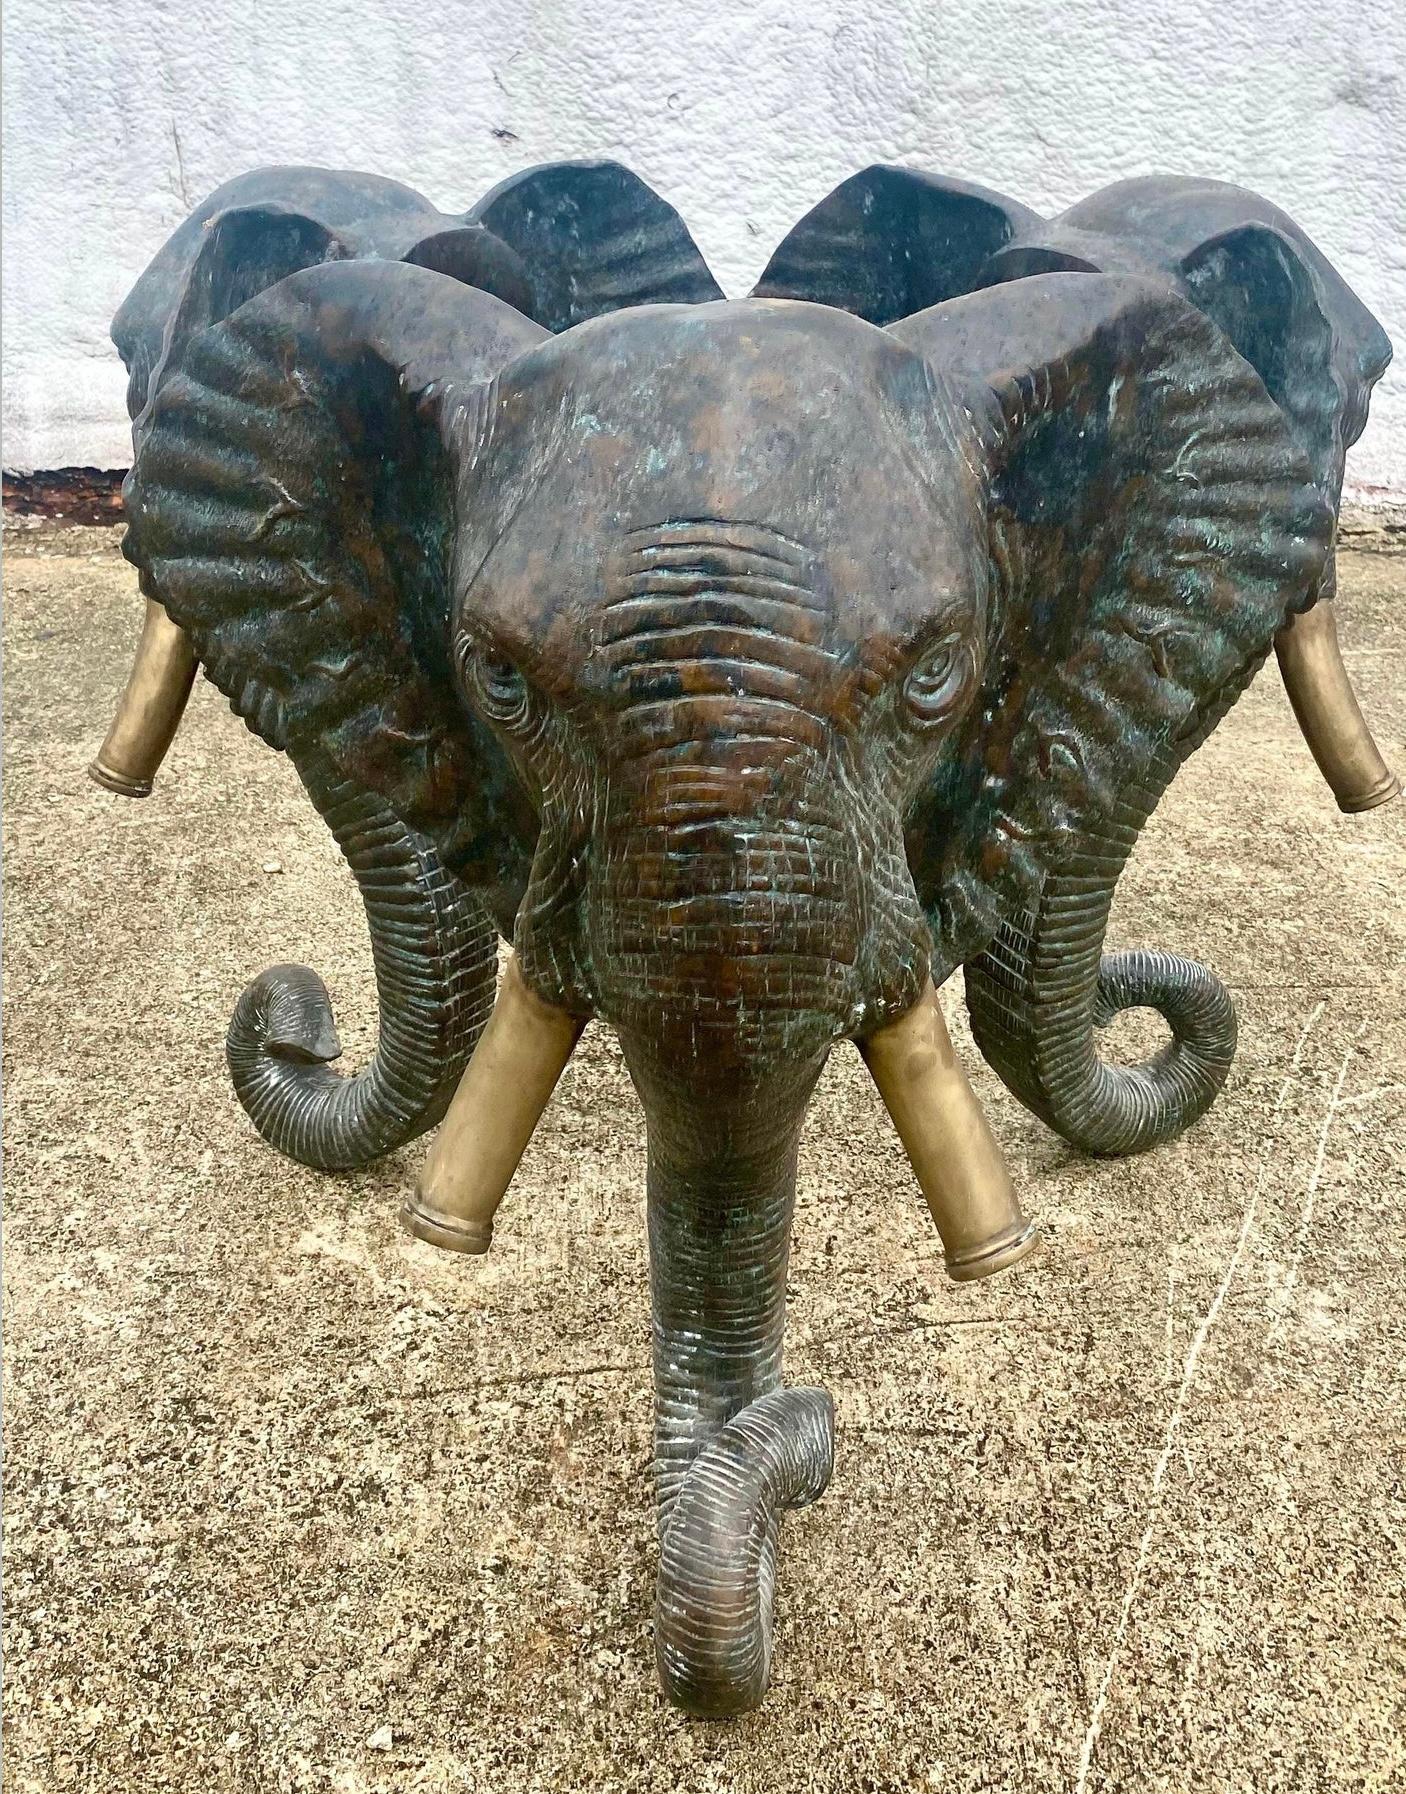 Incredible vintage Regency elephant center table pedestal. Solid bronze with striking sculpted detail. Brass capped tusks. Can be used as a side table or a center table. Acquired from a Palm Beach estate.